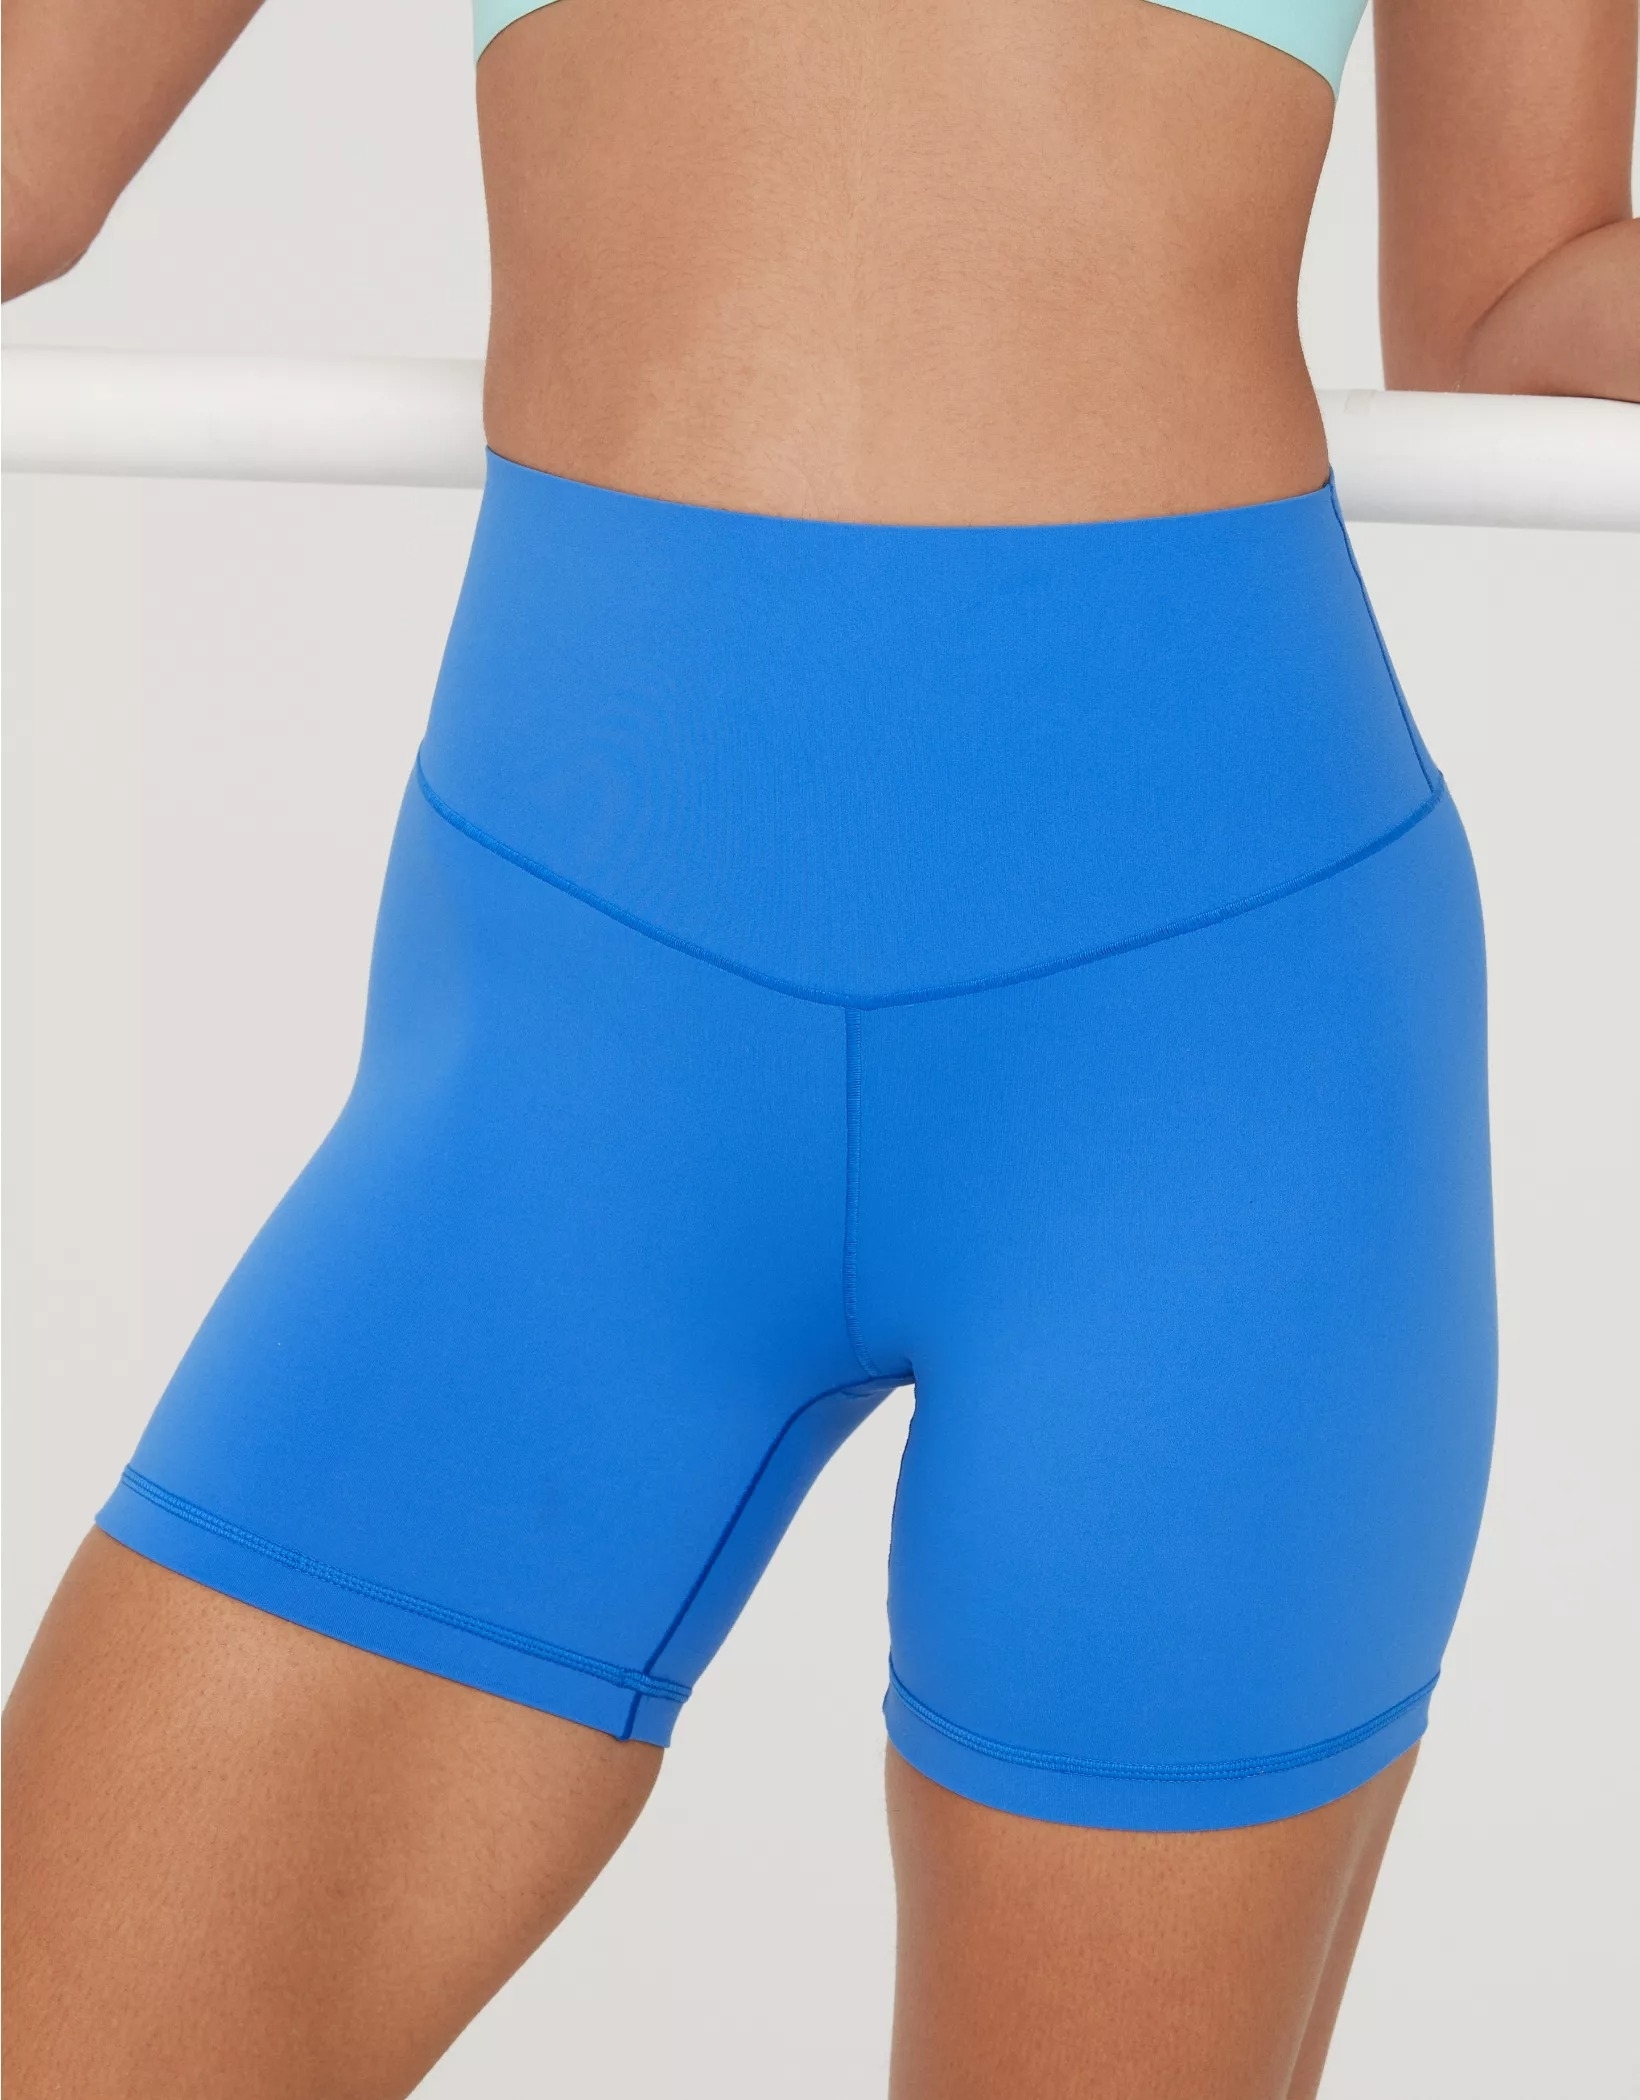 model wearing the blue shorts